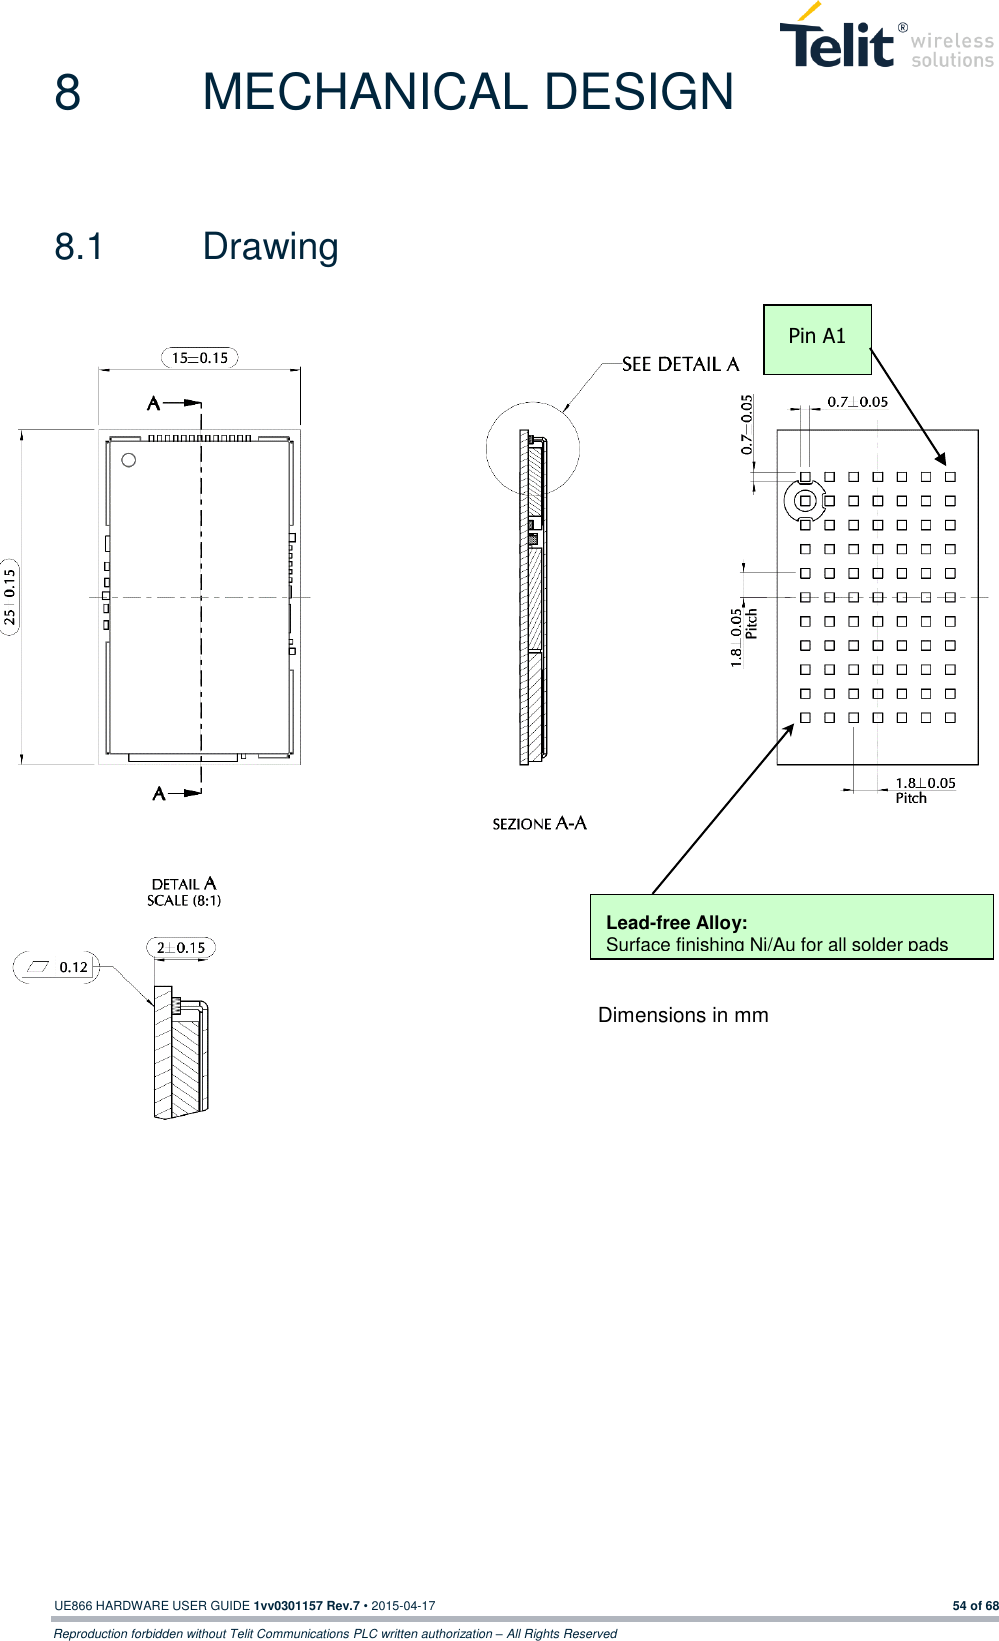  UE866 HARDWARE USER GUIDE 1vv0301157 Rev.7 • 2015-04-17 54 of 68 Reproduction forbidden without Telit Communications PLC written authorization – All Rights Reserved 8  MECHANICAL DESIGN 8.1  Drawing                           Pin A1 Lead-free Alloy: Surface finishing Ni/Au for all solder pads  Dimensions in mm 